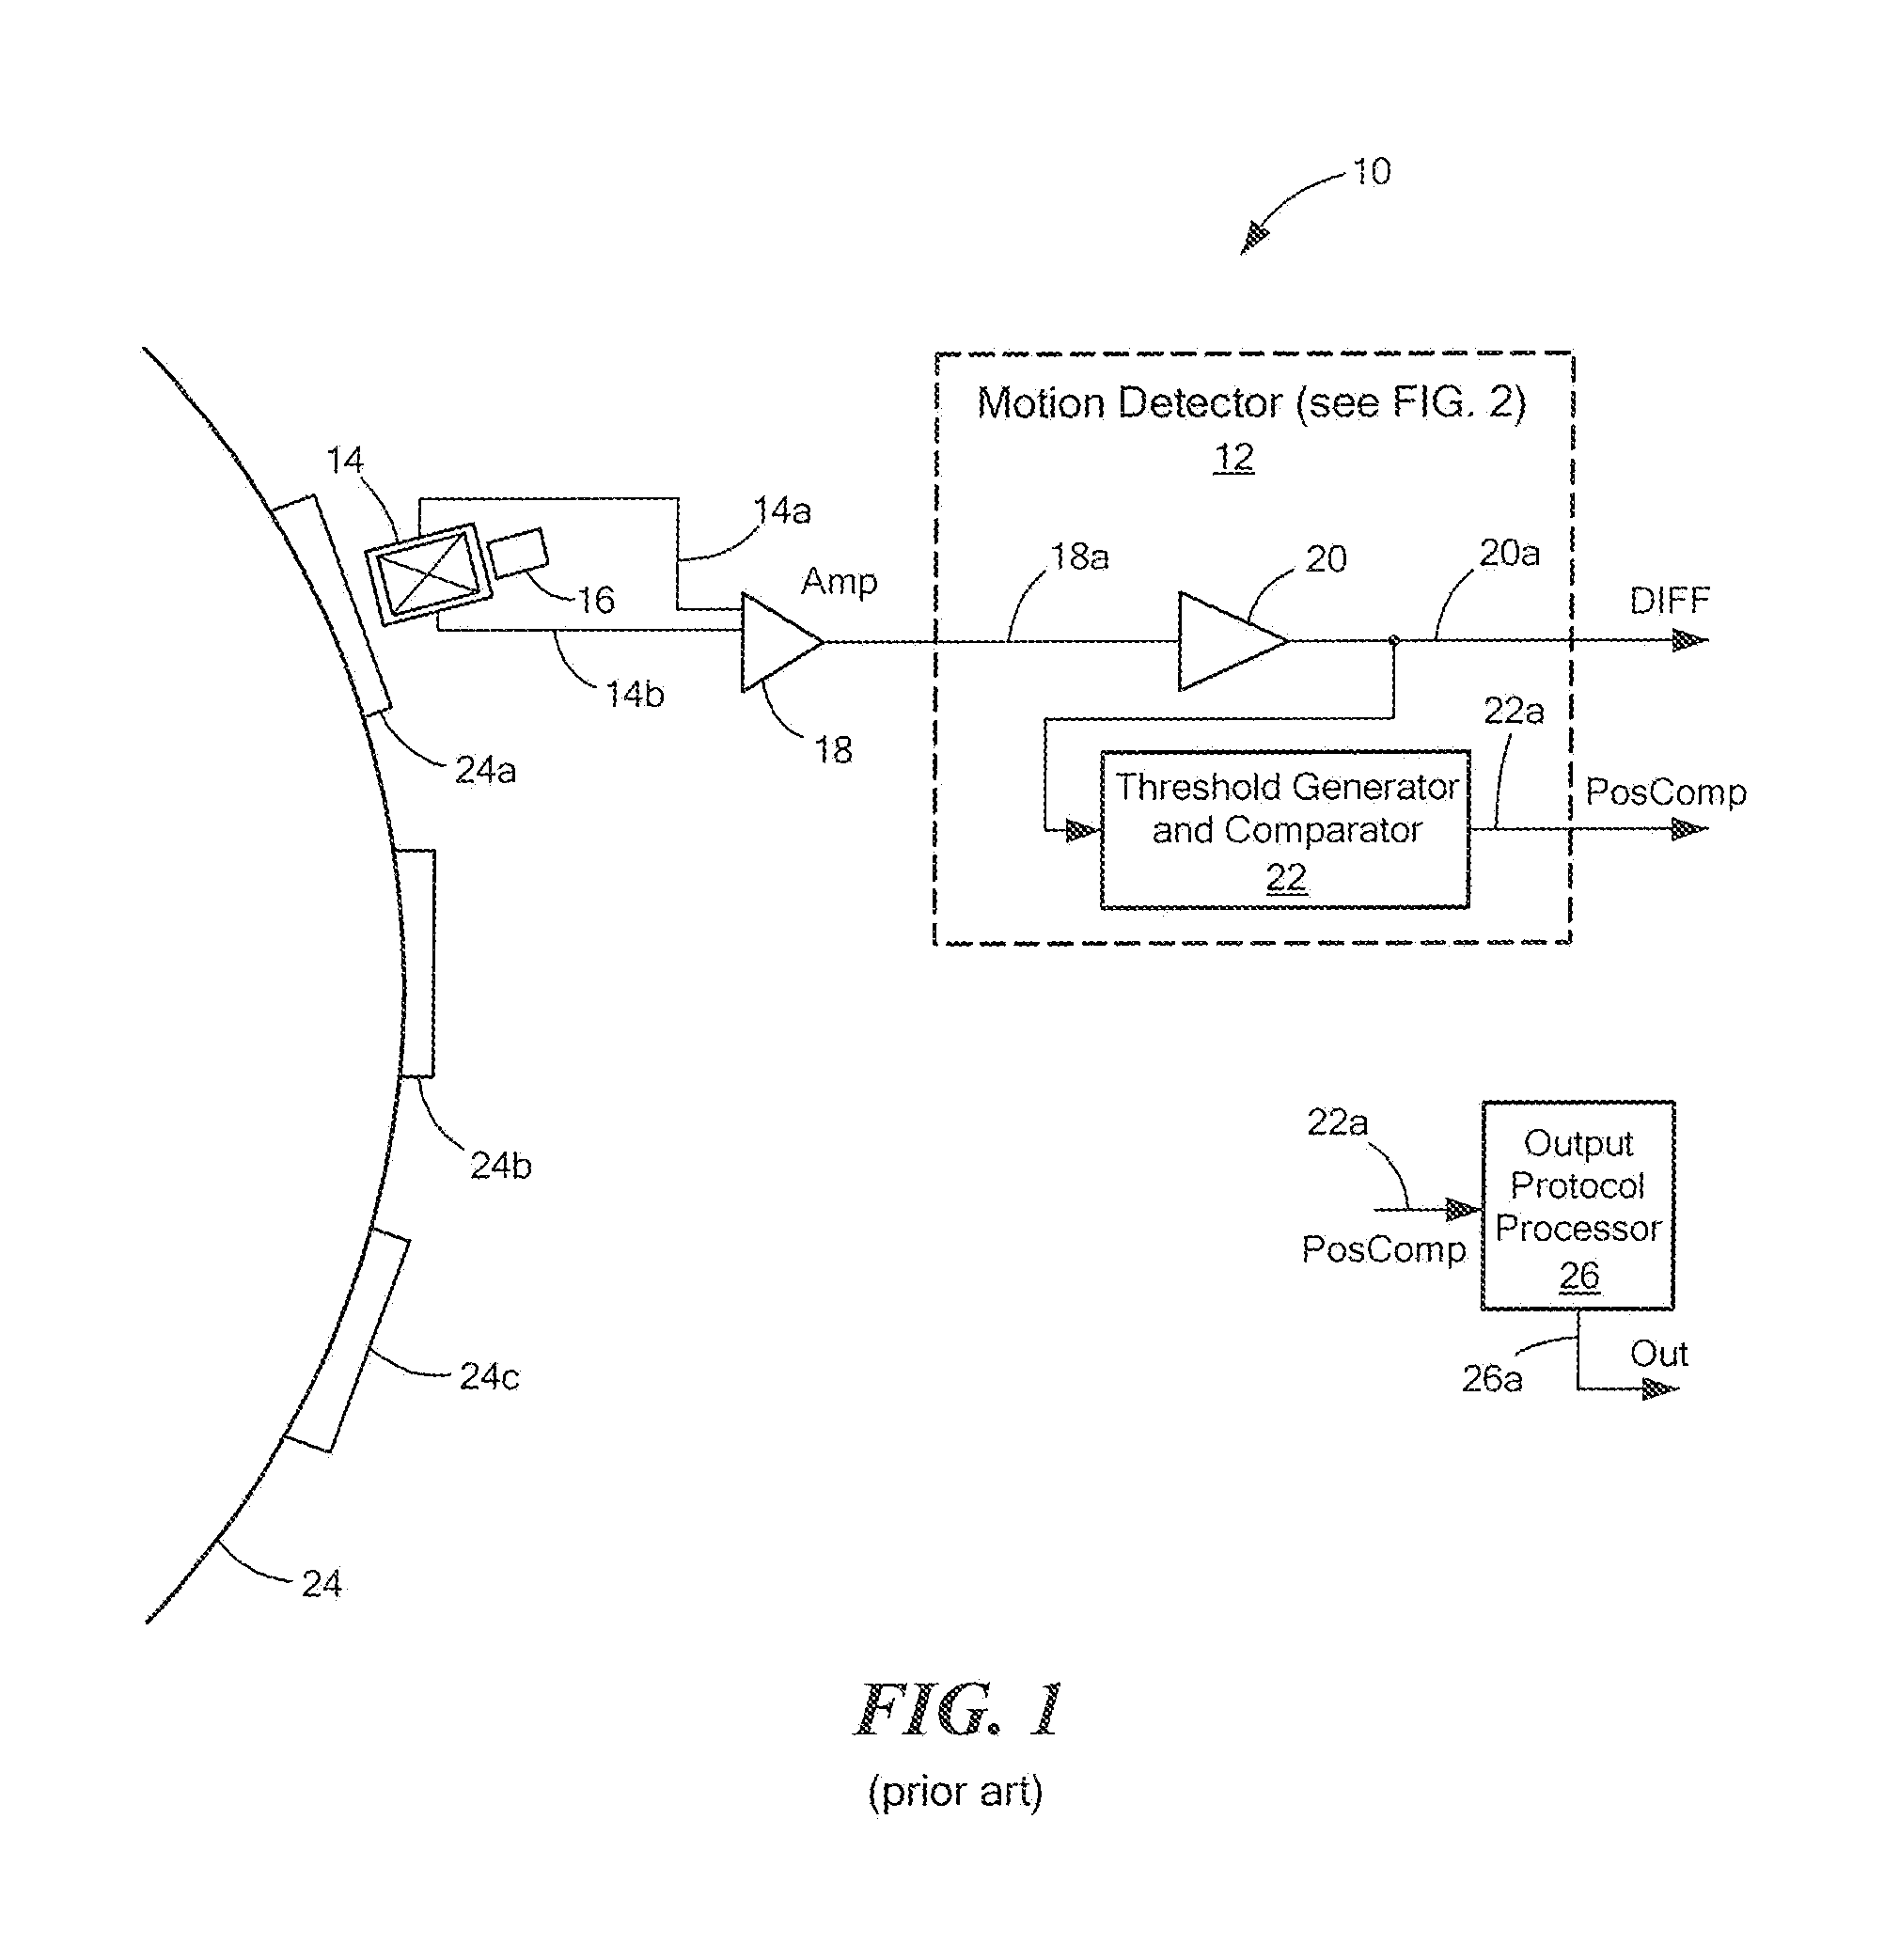 Circuits and Methods for Generating a Threshold Signal Used in a Motion Detector In Accordance With a Least Common Multiple of a Set of Possible Quantities of Features Upon a Target